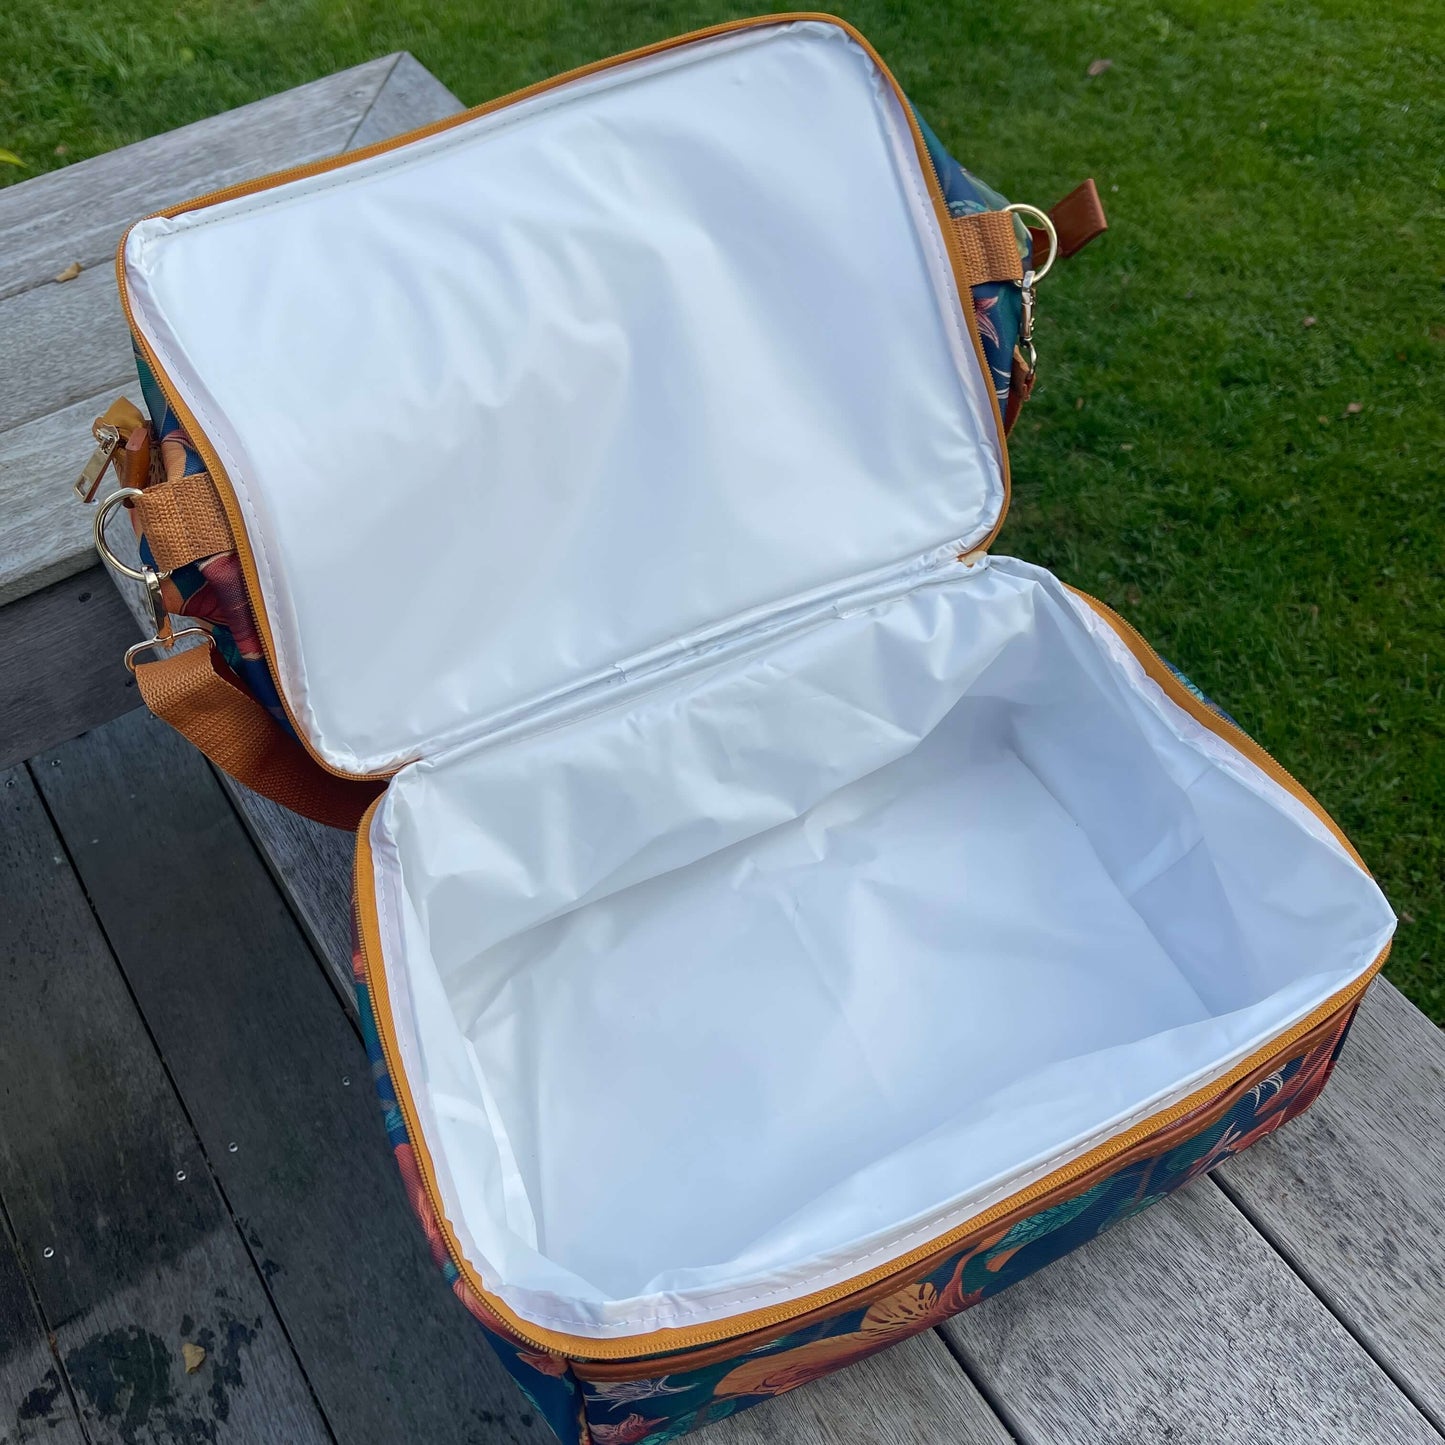 Large fabric cooler bag sitting on a deck opened up to  show white lining.